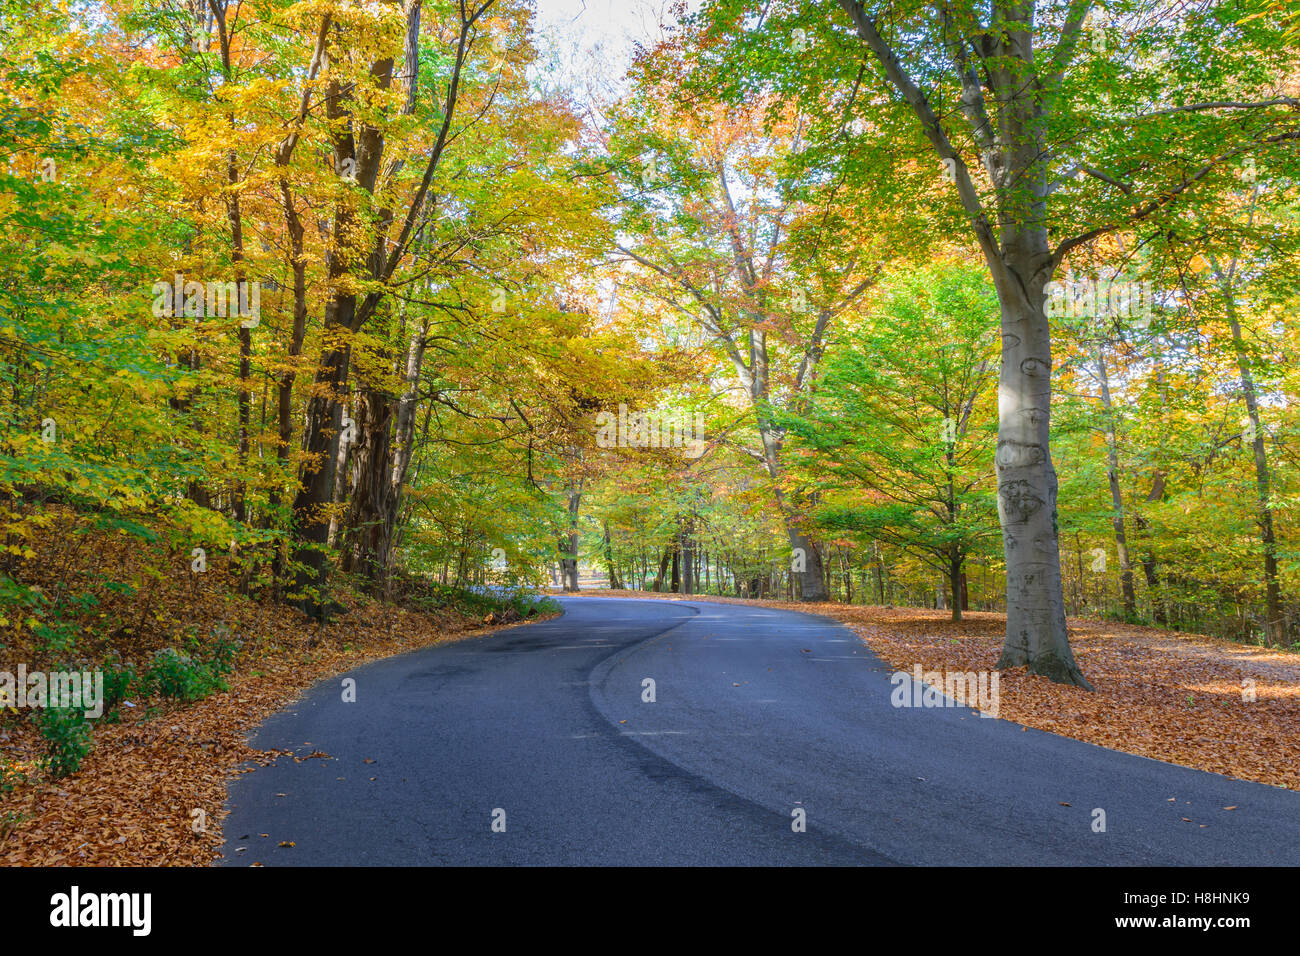 Road winding through trees with fall colors and leaf coverd ground. Cherokee Park Louisville, KY Stock Photo